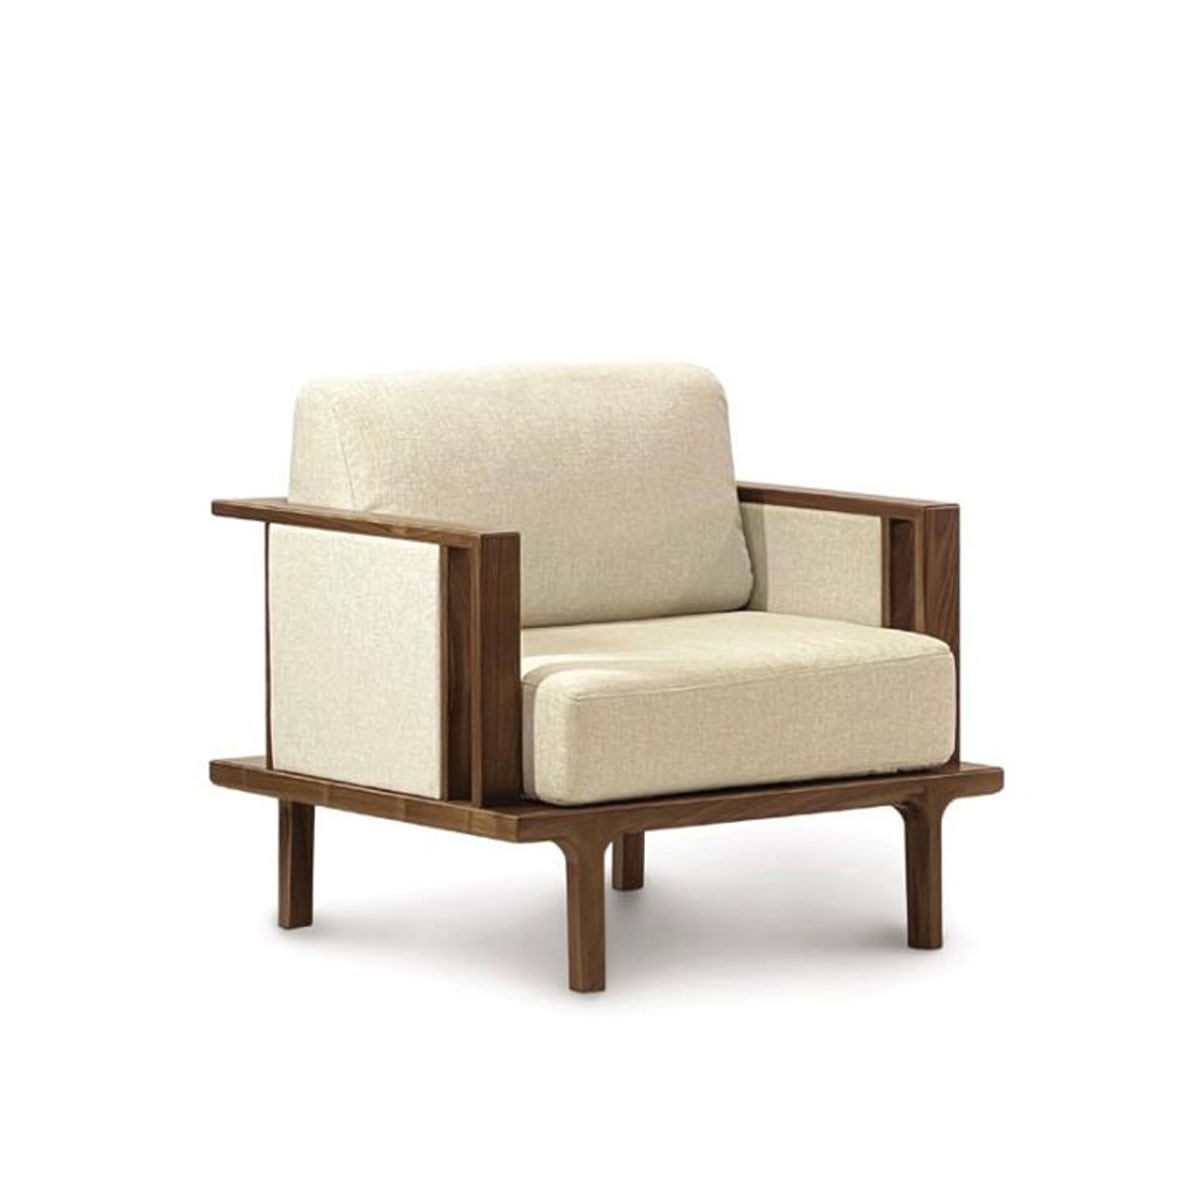 Copeland Sierra Chair with Upholstered Panels in Walnut